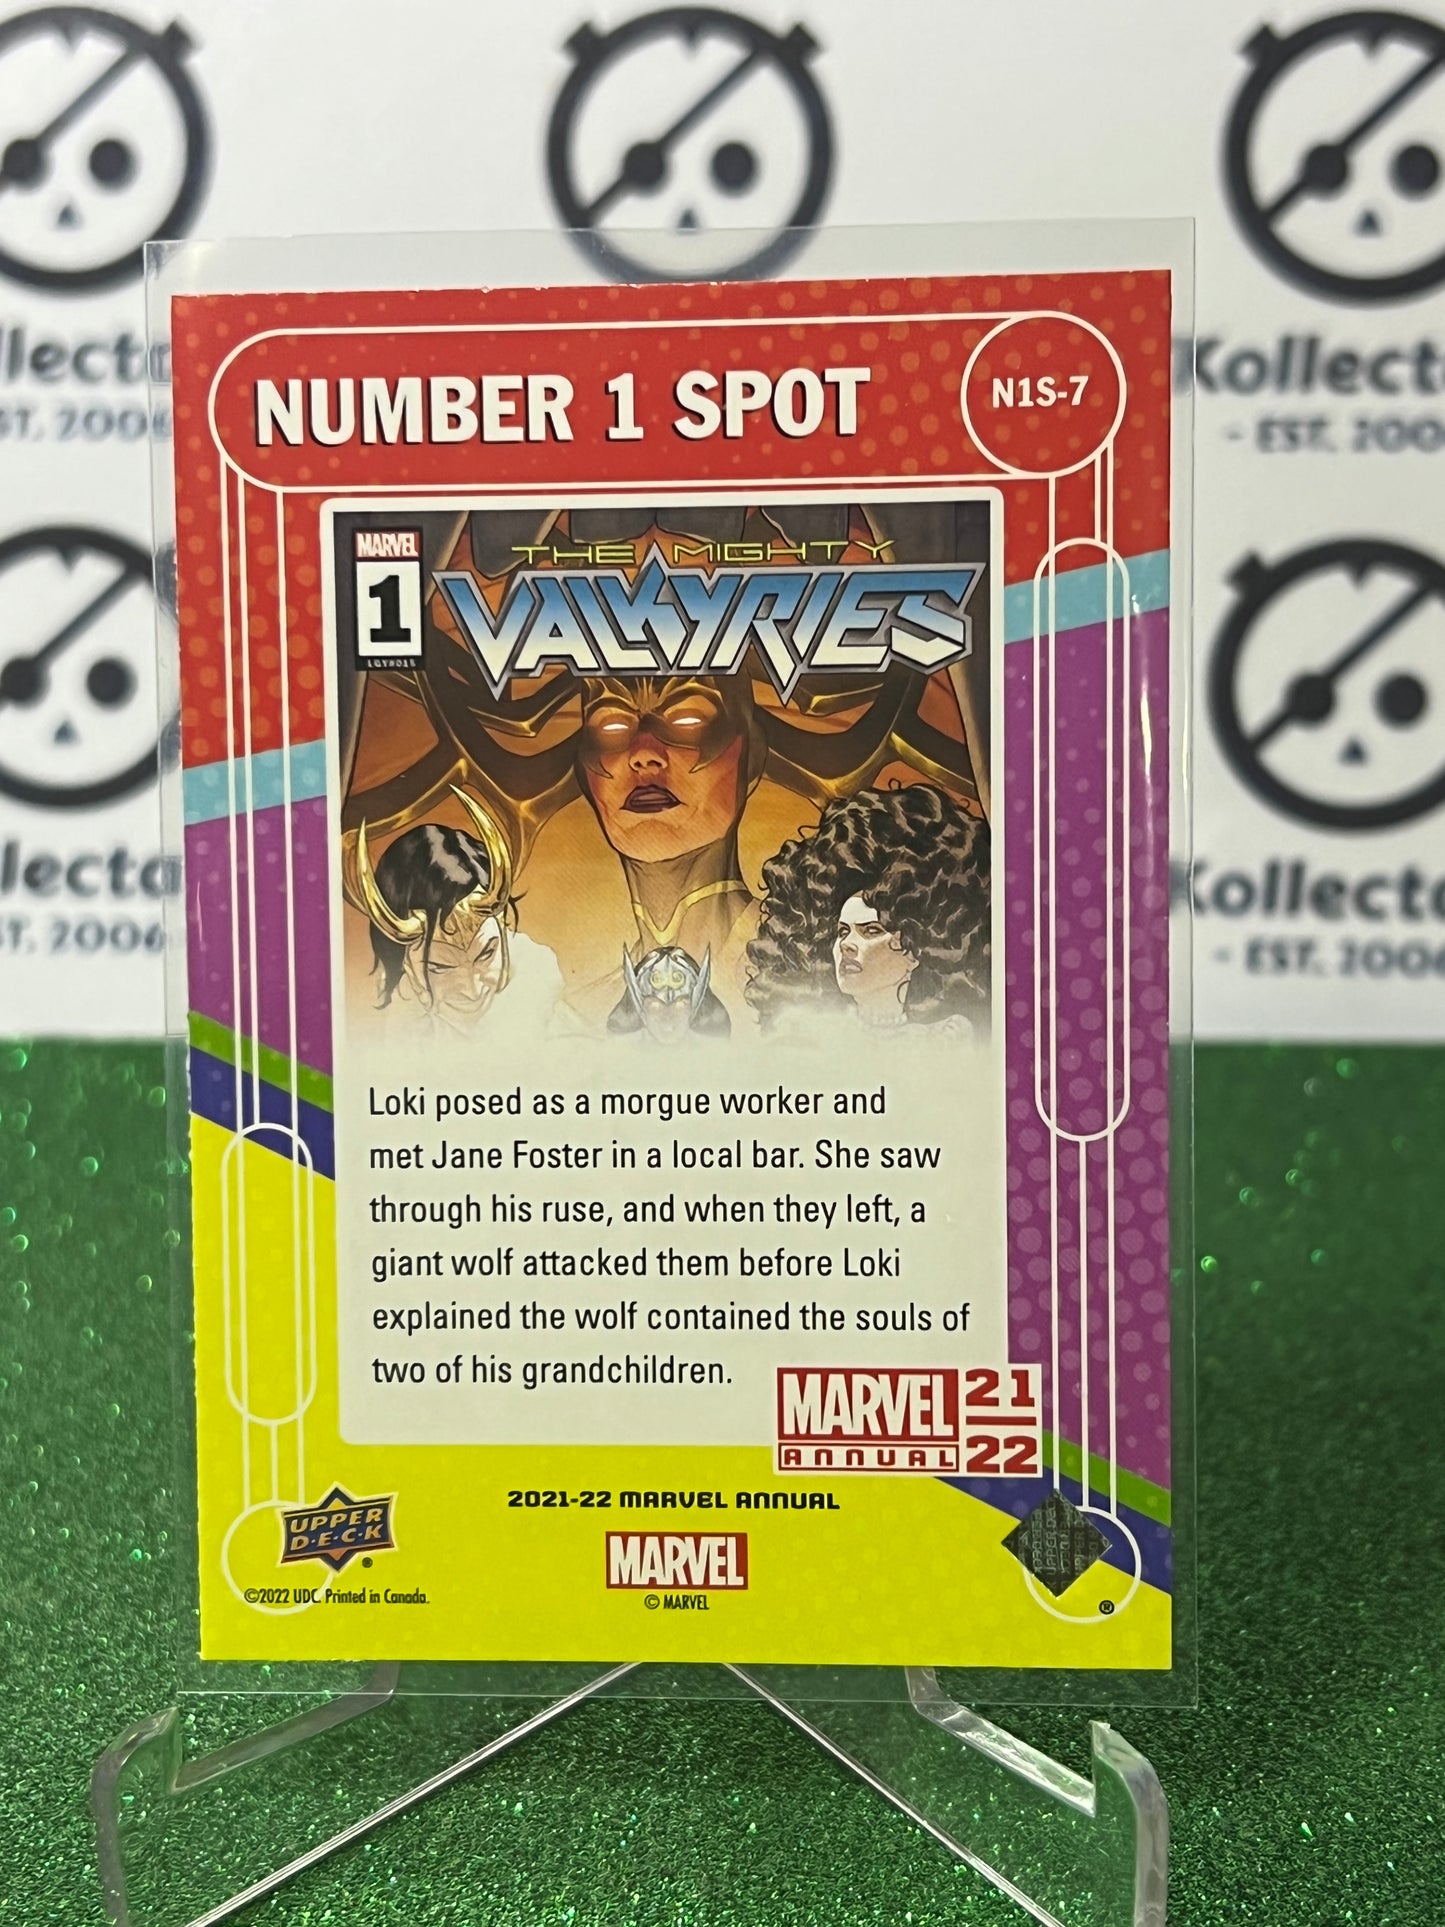 2021-22 MARVEL ANNUAL UPPER DECK VALKYRIES # N1S-7 THE MIGHTY VALKYRIES NON-SPORT TRADING CARD